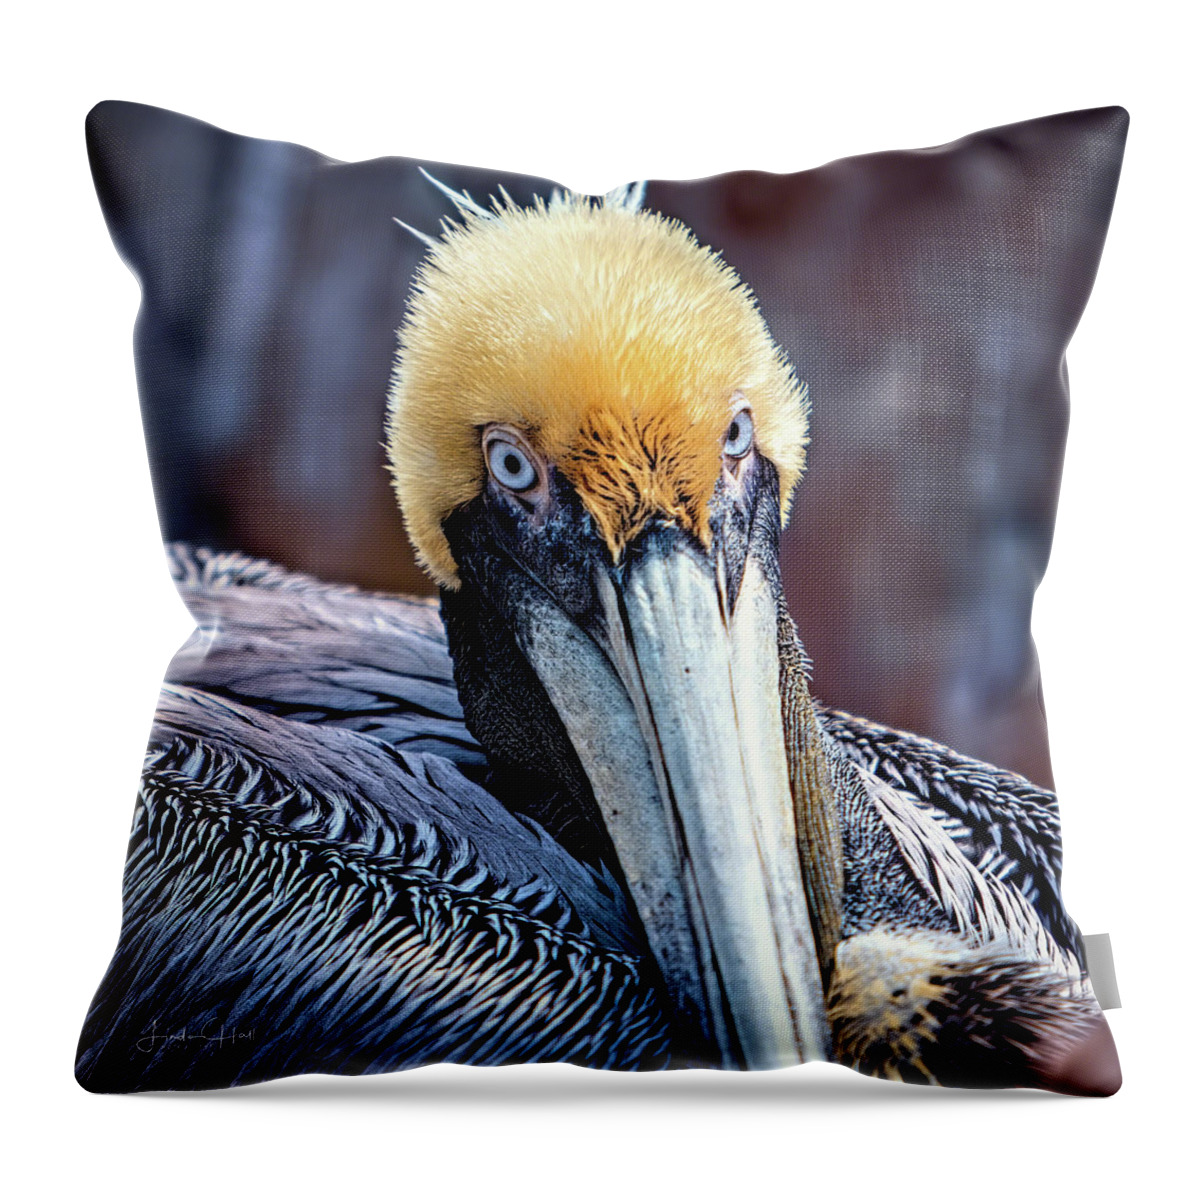 Pelican Throw Pillow featuring the digital art Portrait of a Pelican by Linda Lee Hall